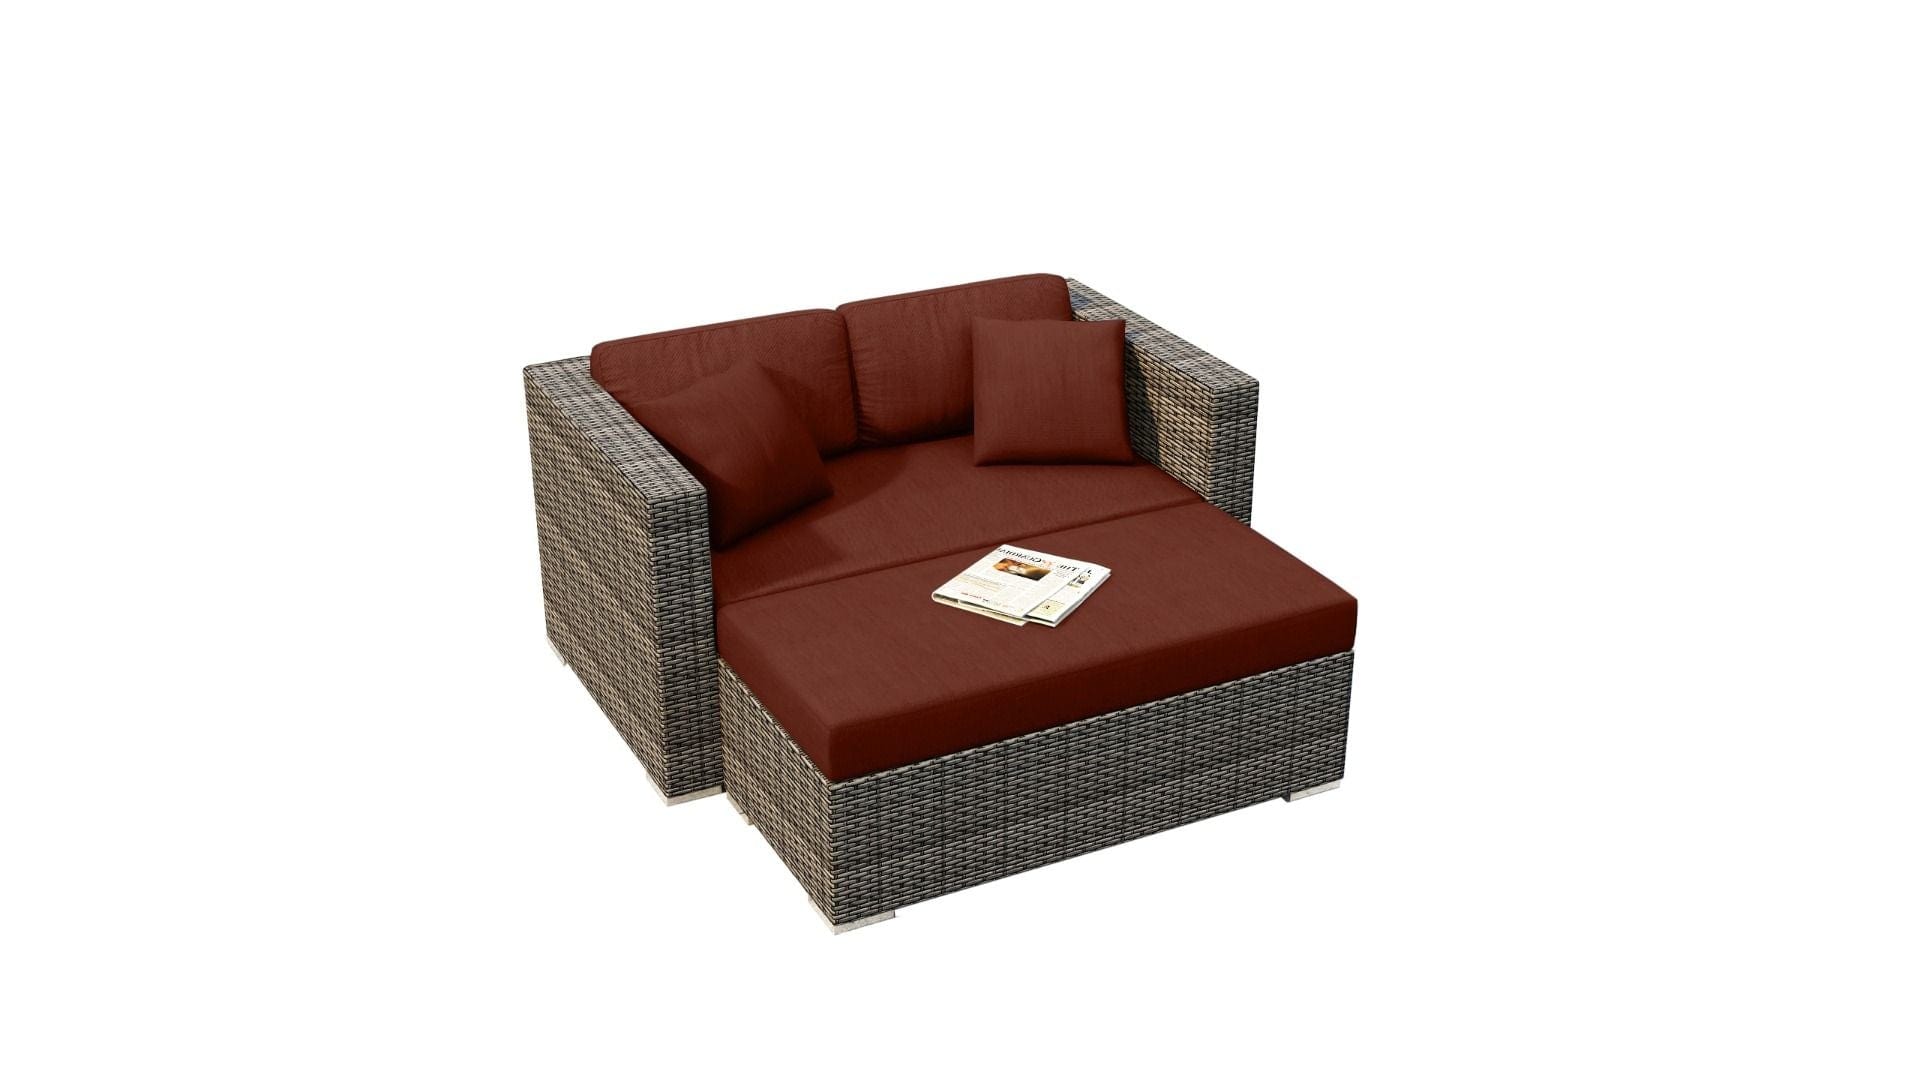 Harmonia Living Outdoor Furniture Canvas Henna Harmonia Living - District Day Lounger | HL-DIS-TS-DL